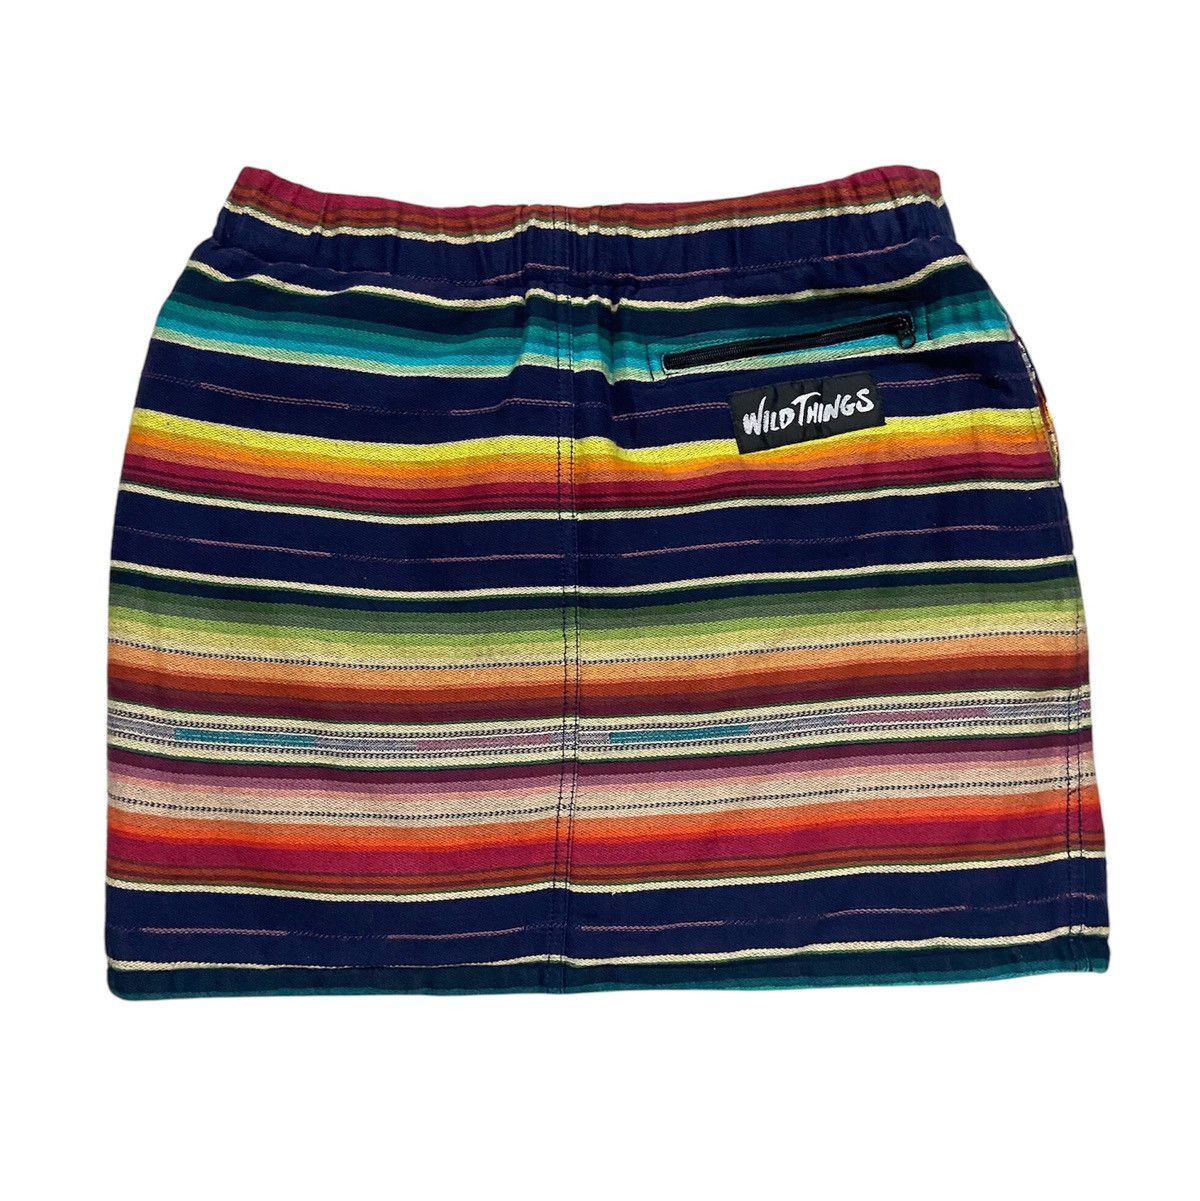 Outdoor Style Go Out! - Wildthings Inside Out Skirt - 2